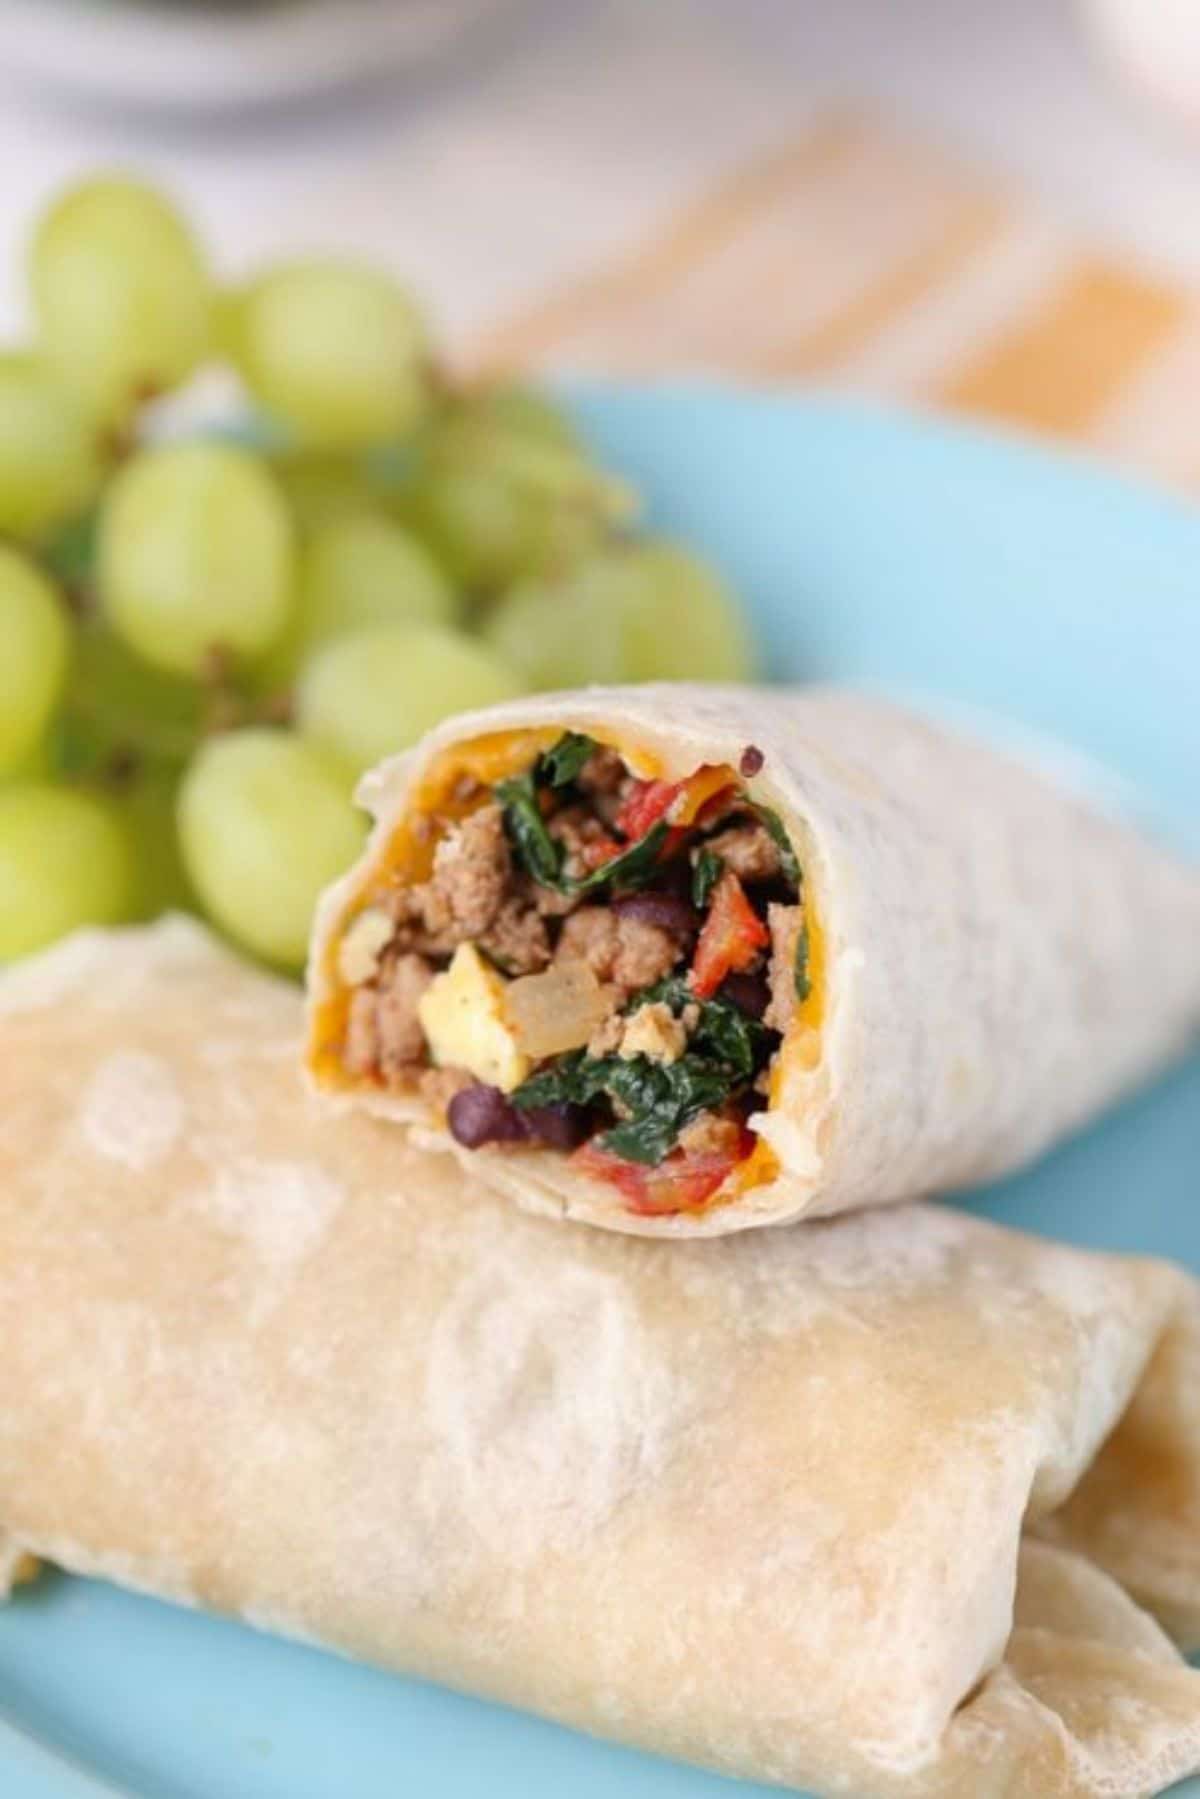 2 tortilla wraps are on a plate filled with sausage, egg and spinach. Behind is a bunch of grapes